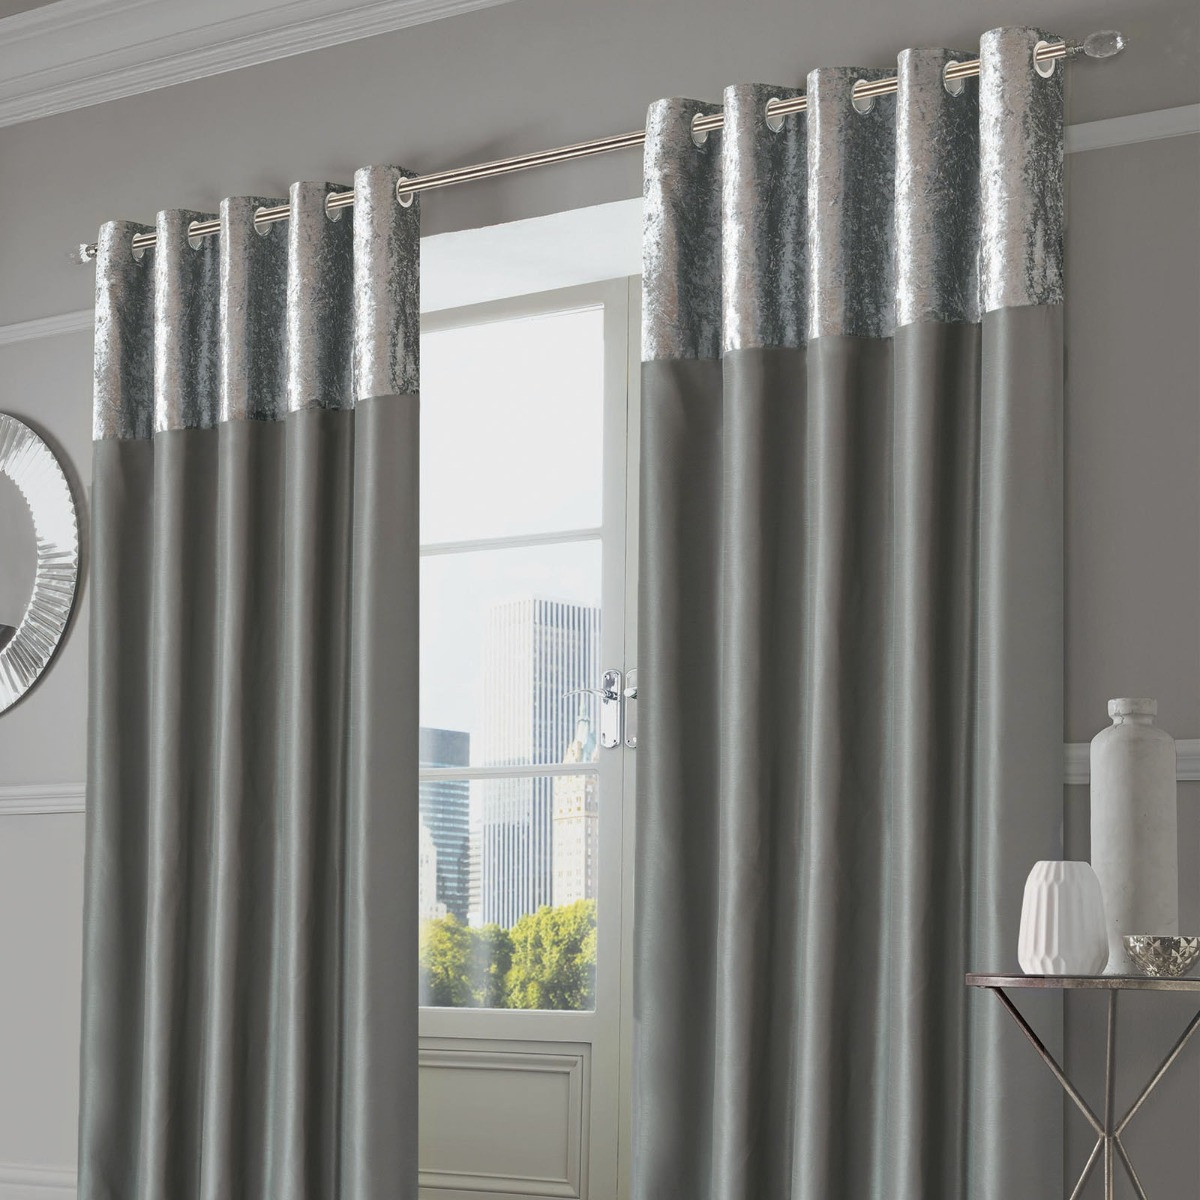 Sienna Home Crushed Velvet Band Eyelet Curtains, Silver Grey - 66"x54">